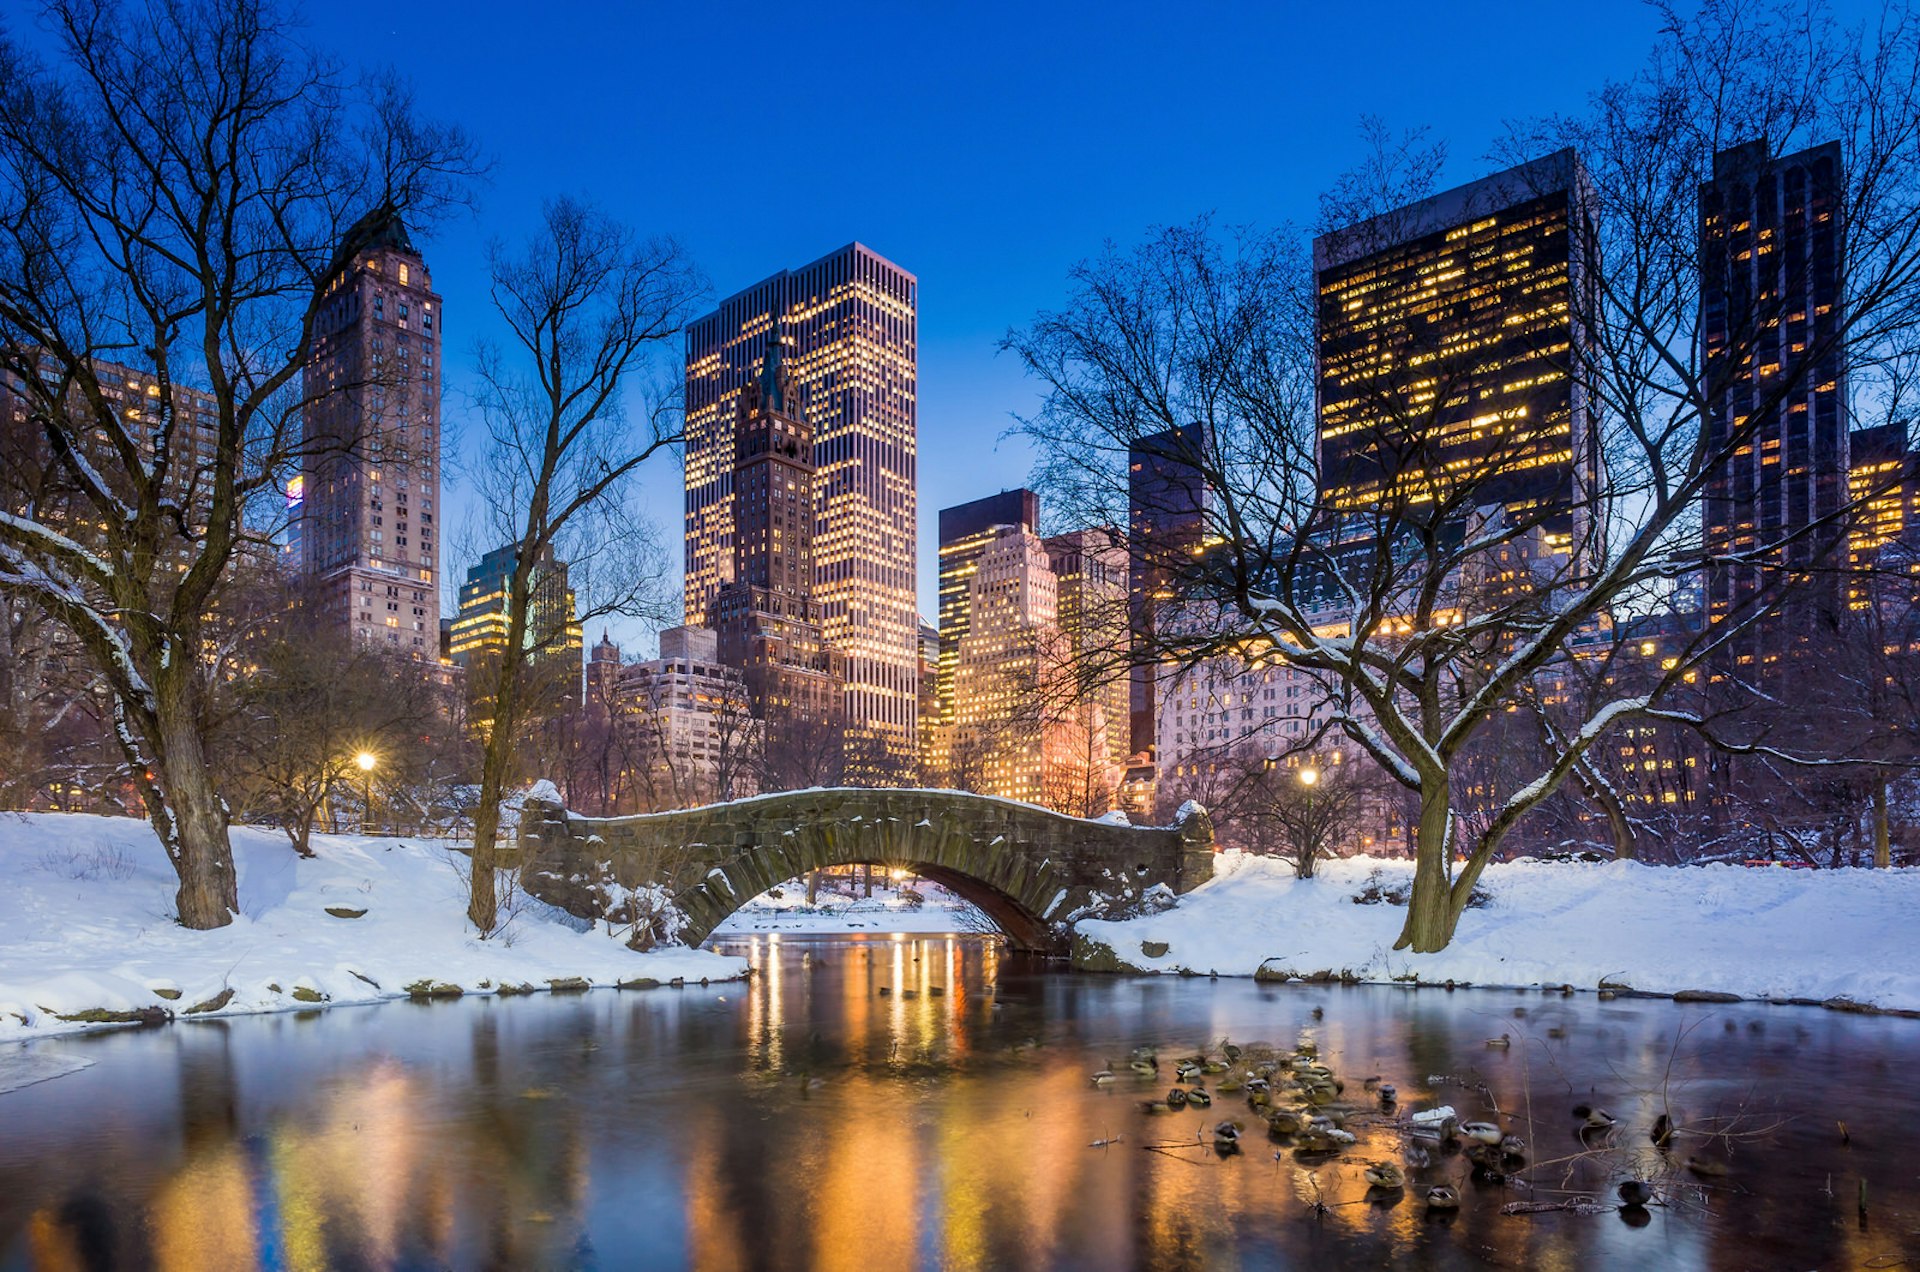 Central Park in New York at night. A layer of snow covers the ground and skyscrapers are visible in the background